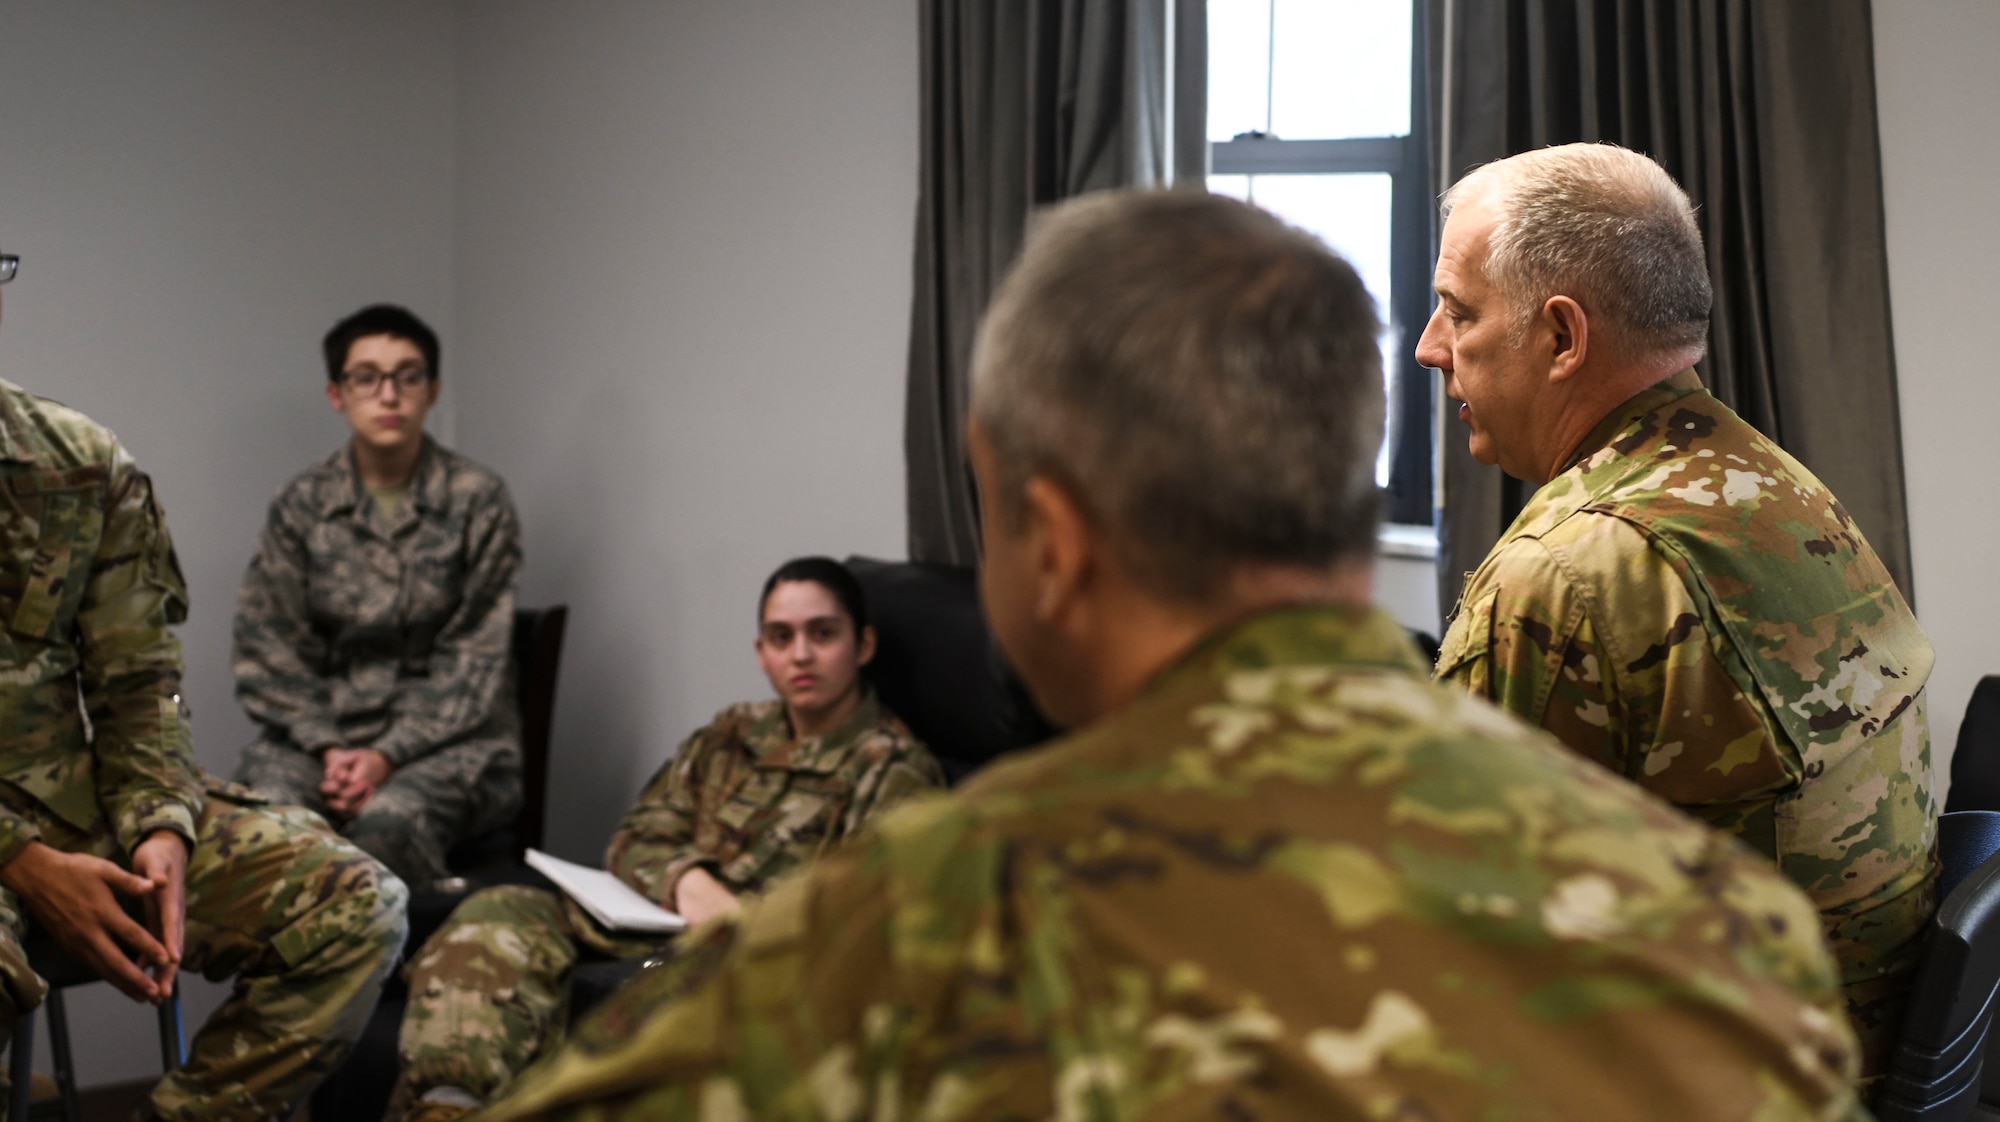 Maj. Gen. John Gordy, U.S. Air Force Expeditionary Center commander, meets with Airmen Dec. 10, 2019, at Joint Base Charleston, S.C. During USAF EC leadership’s visit, they toured various facilities across the installation for a behind-the-scenes look at base operations and watched service members in action. The USAF EC is the Air Force’s center of excellence for rapid global mobility and agile combat support training and education. The center also has direct oversight for installation support, contingency response and mission sets within the global mobility enterprise.